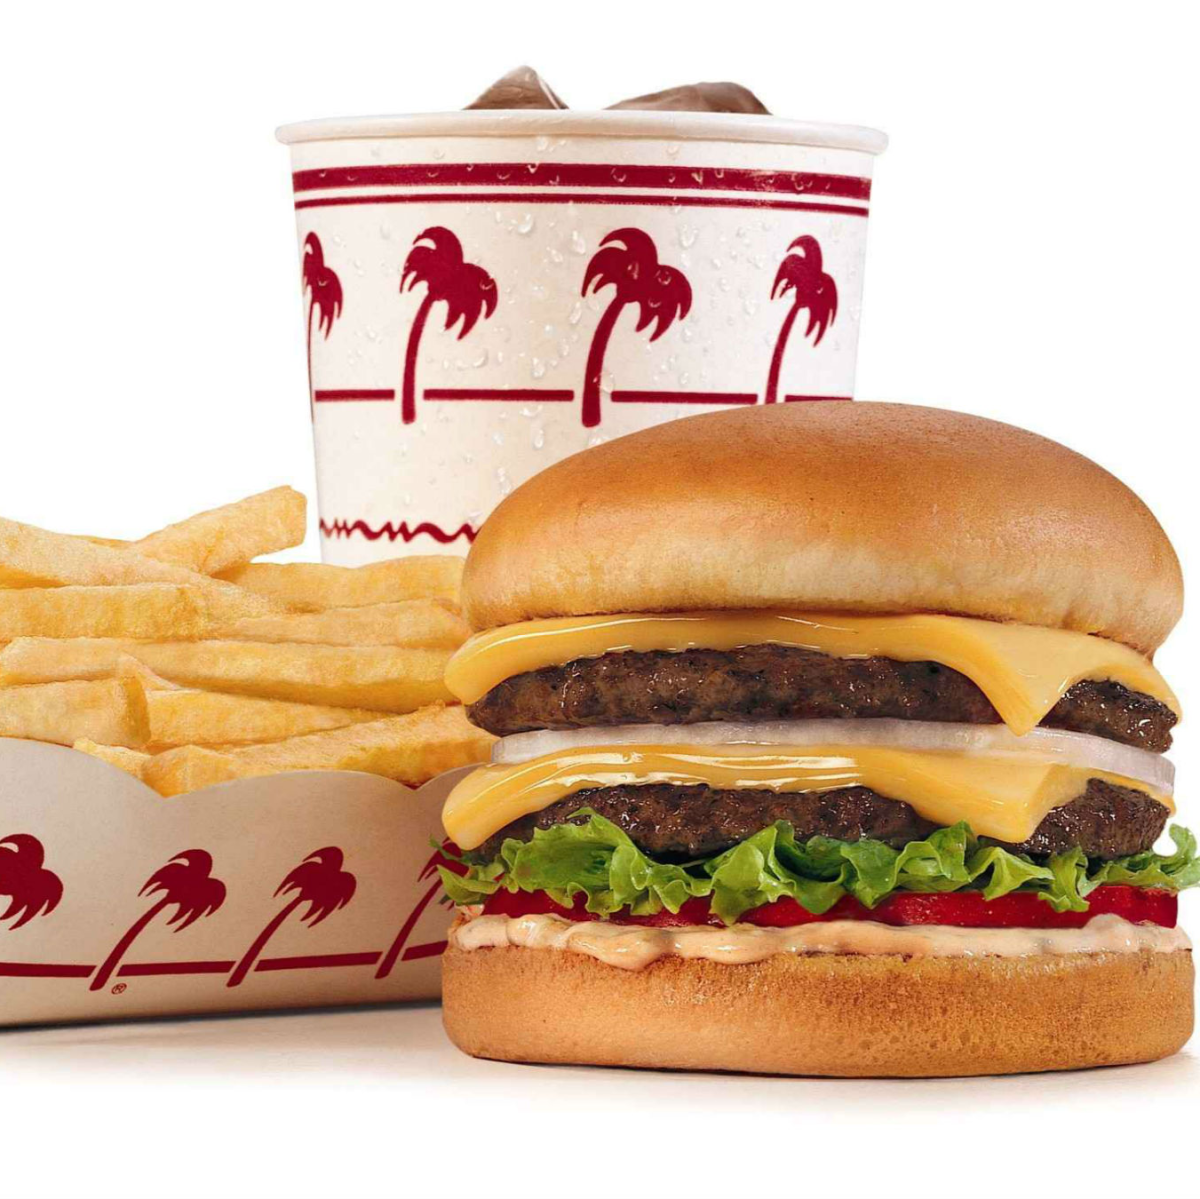 List 91+ Images in-n-out burger houston photos Completed